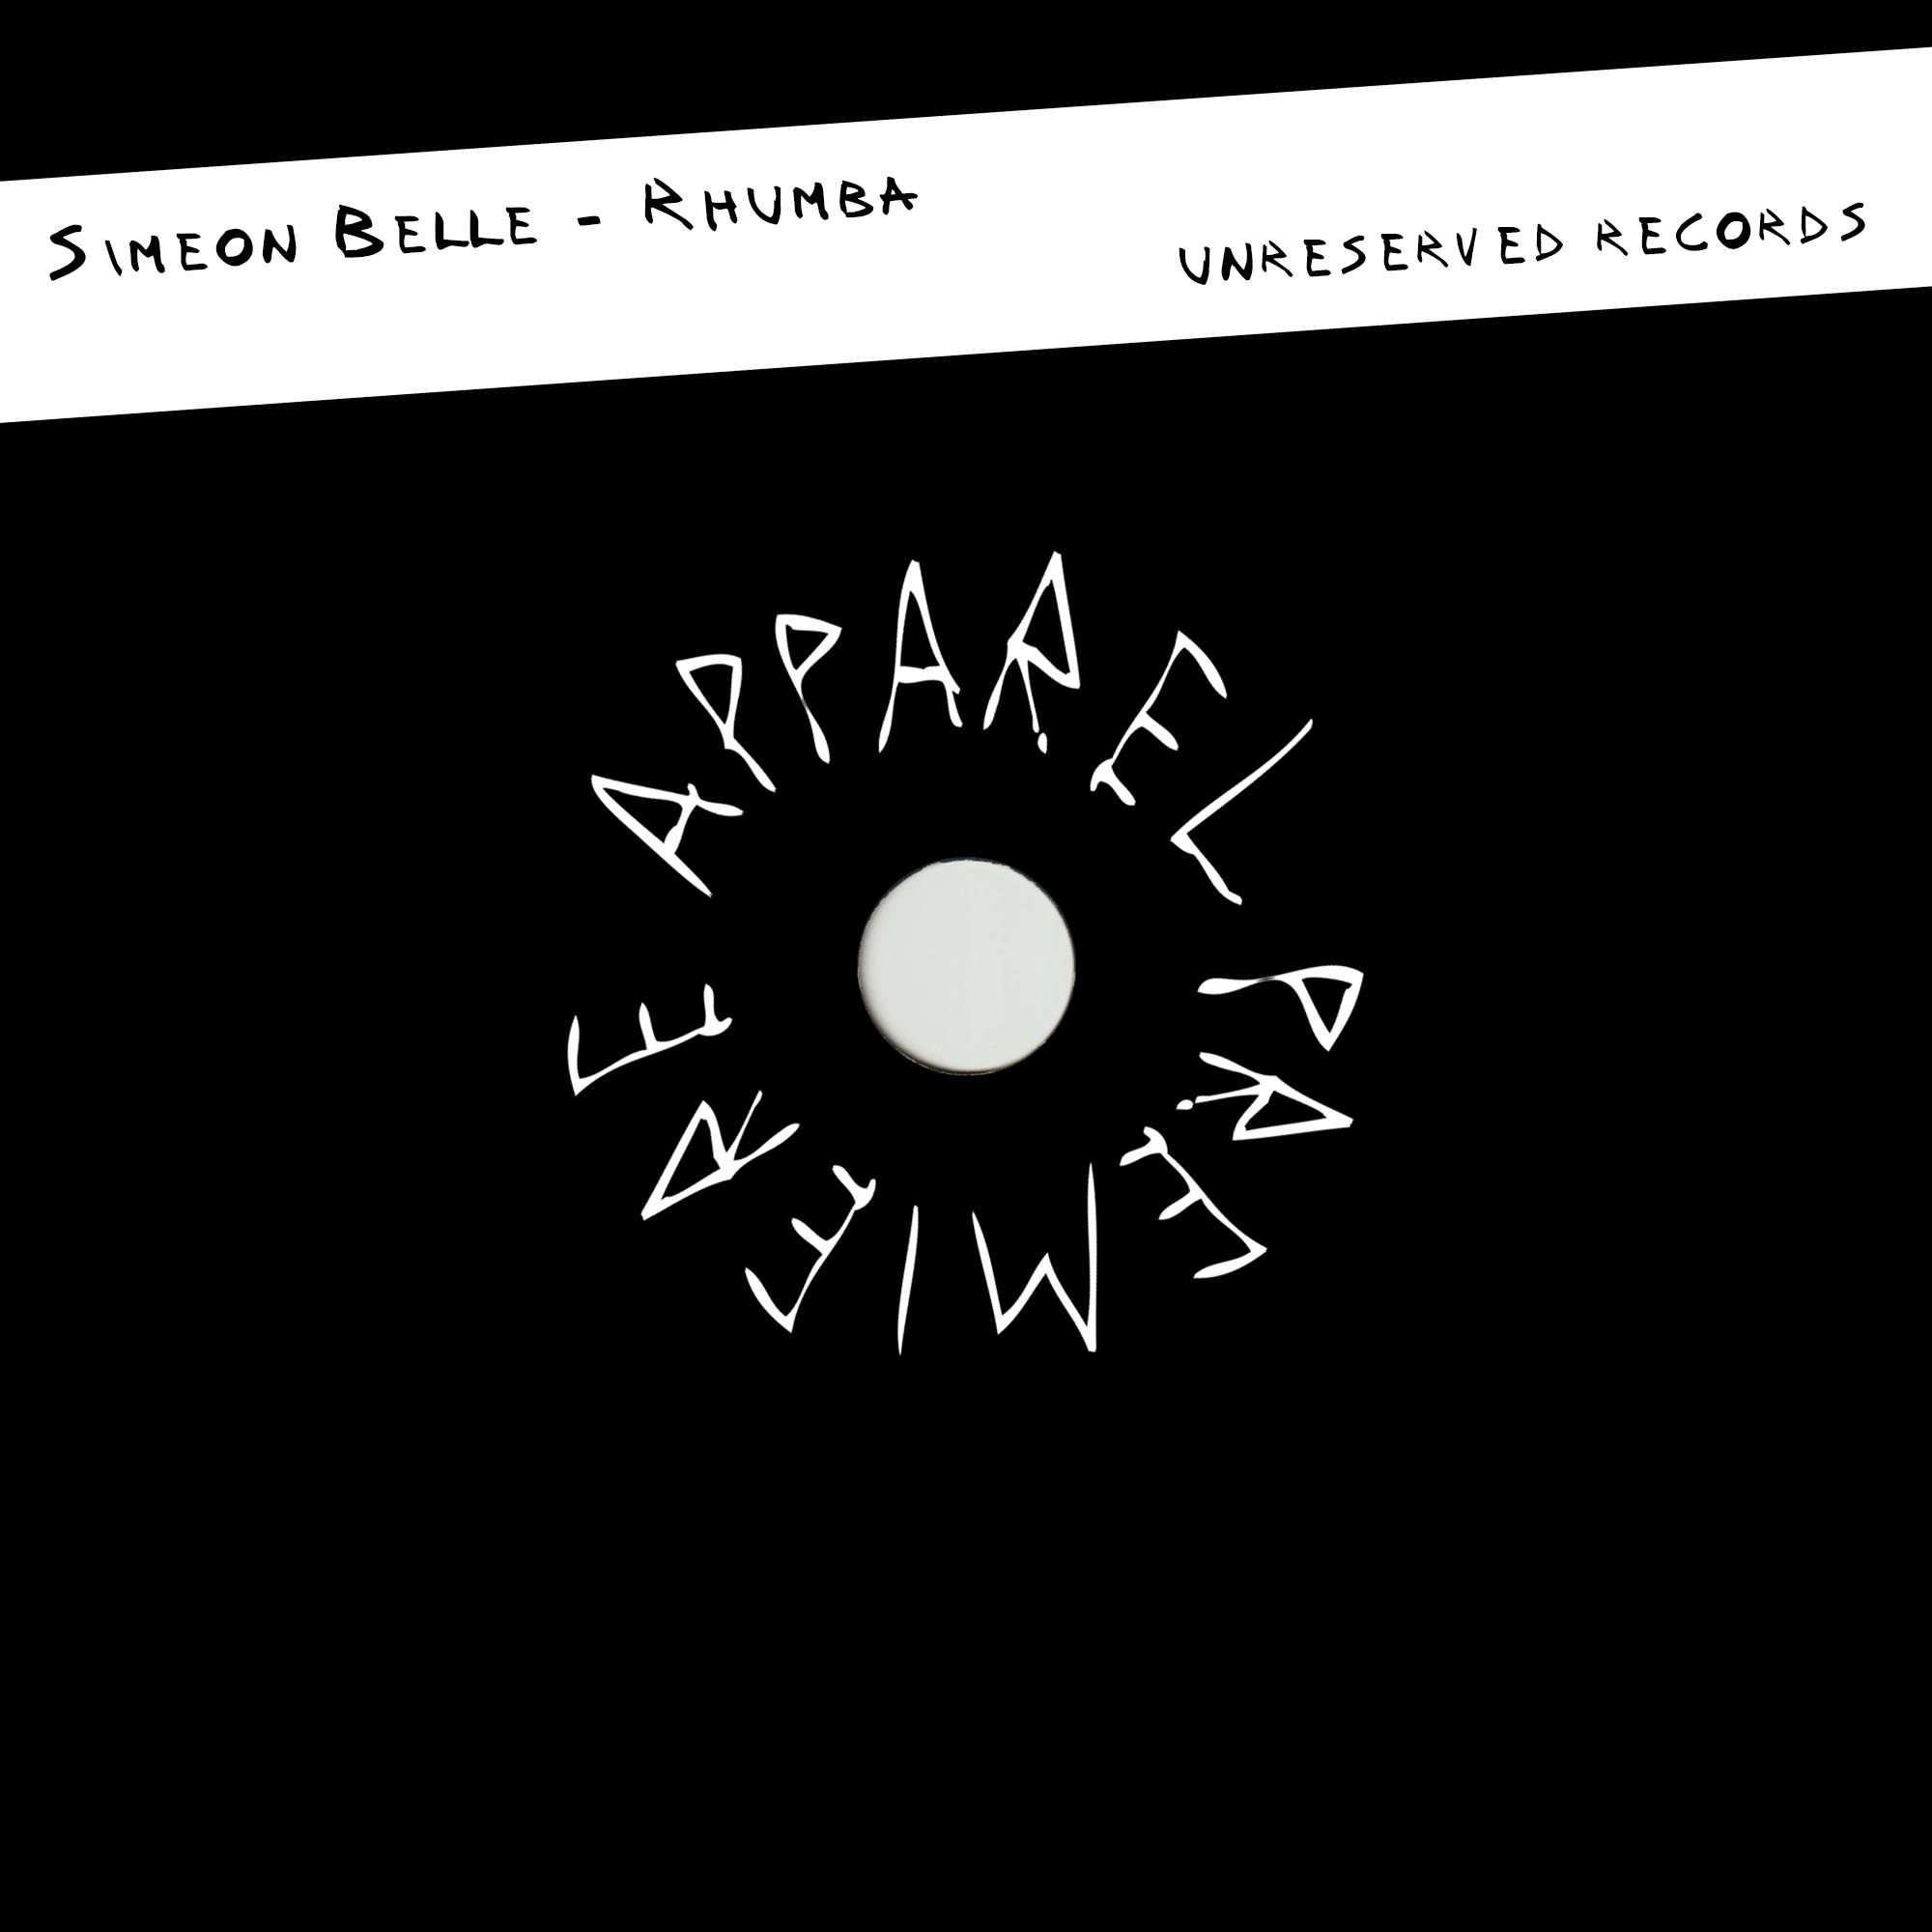 APPAREL PREMIERE Simeon Belle – Rhumba [Unreserved Records]